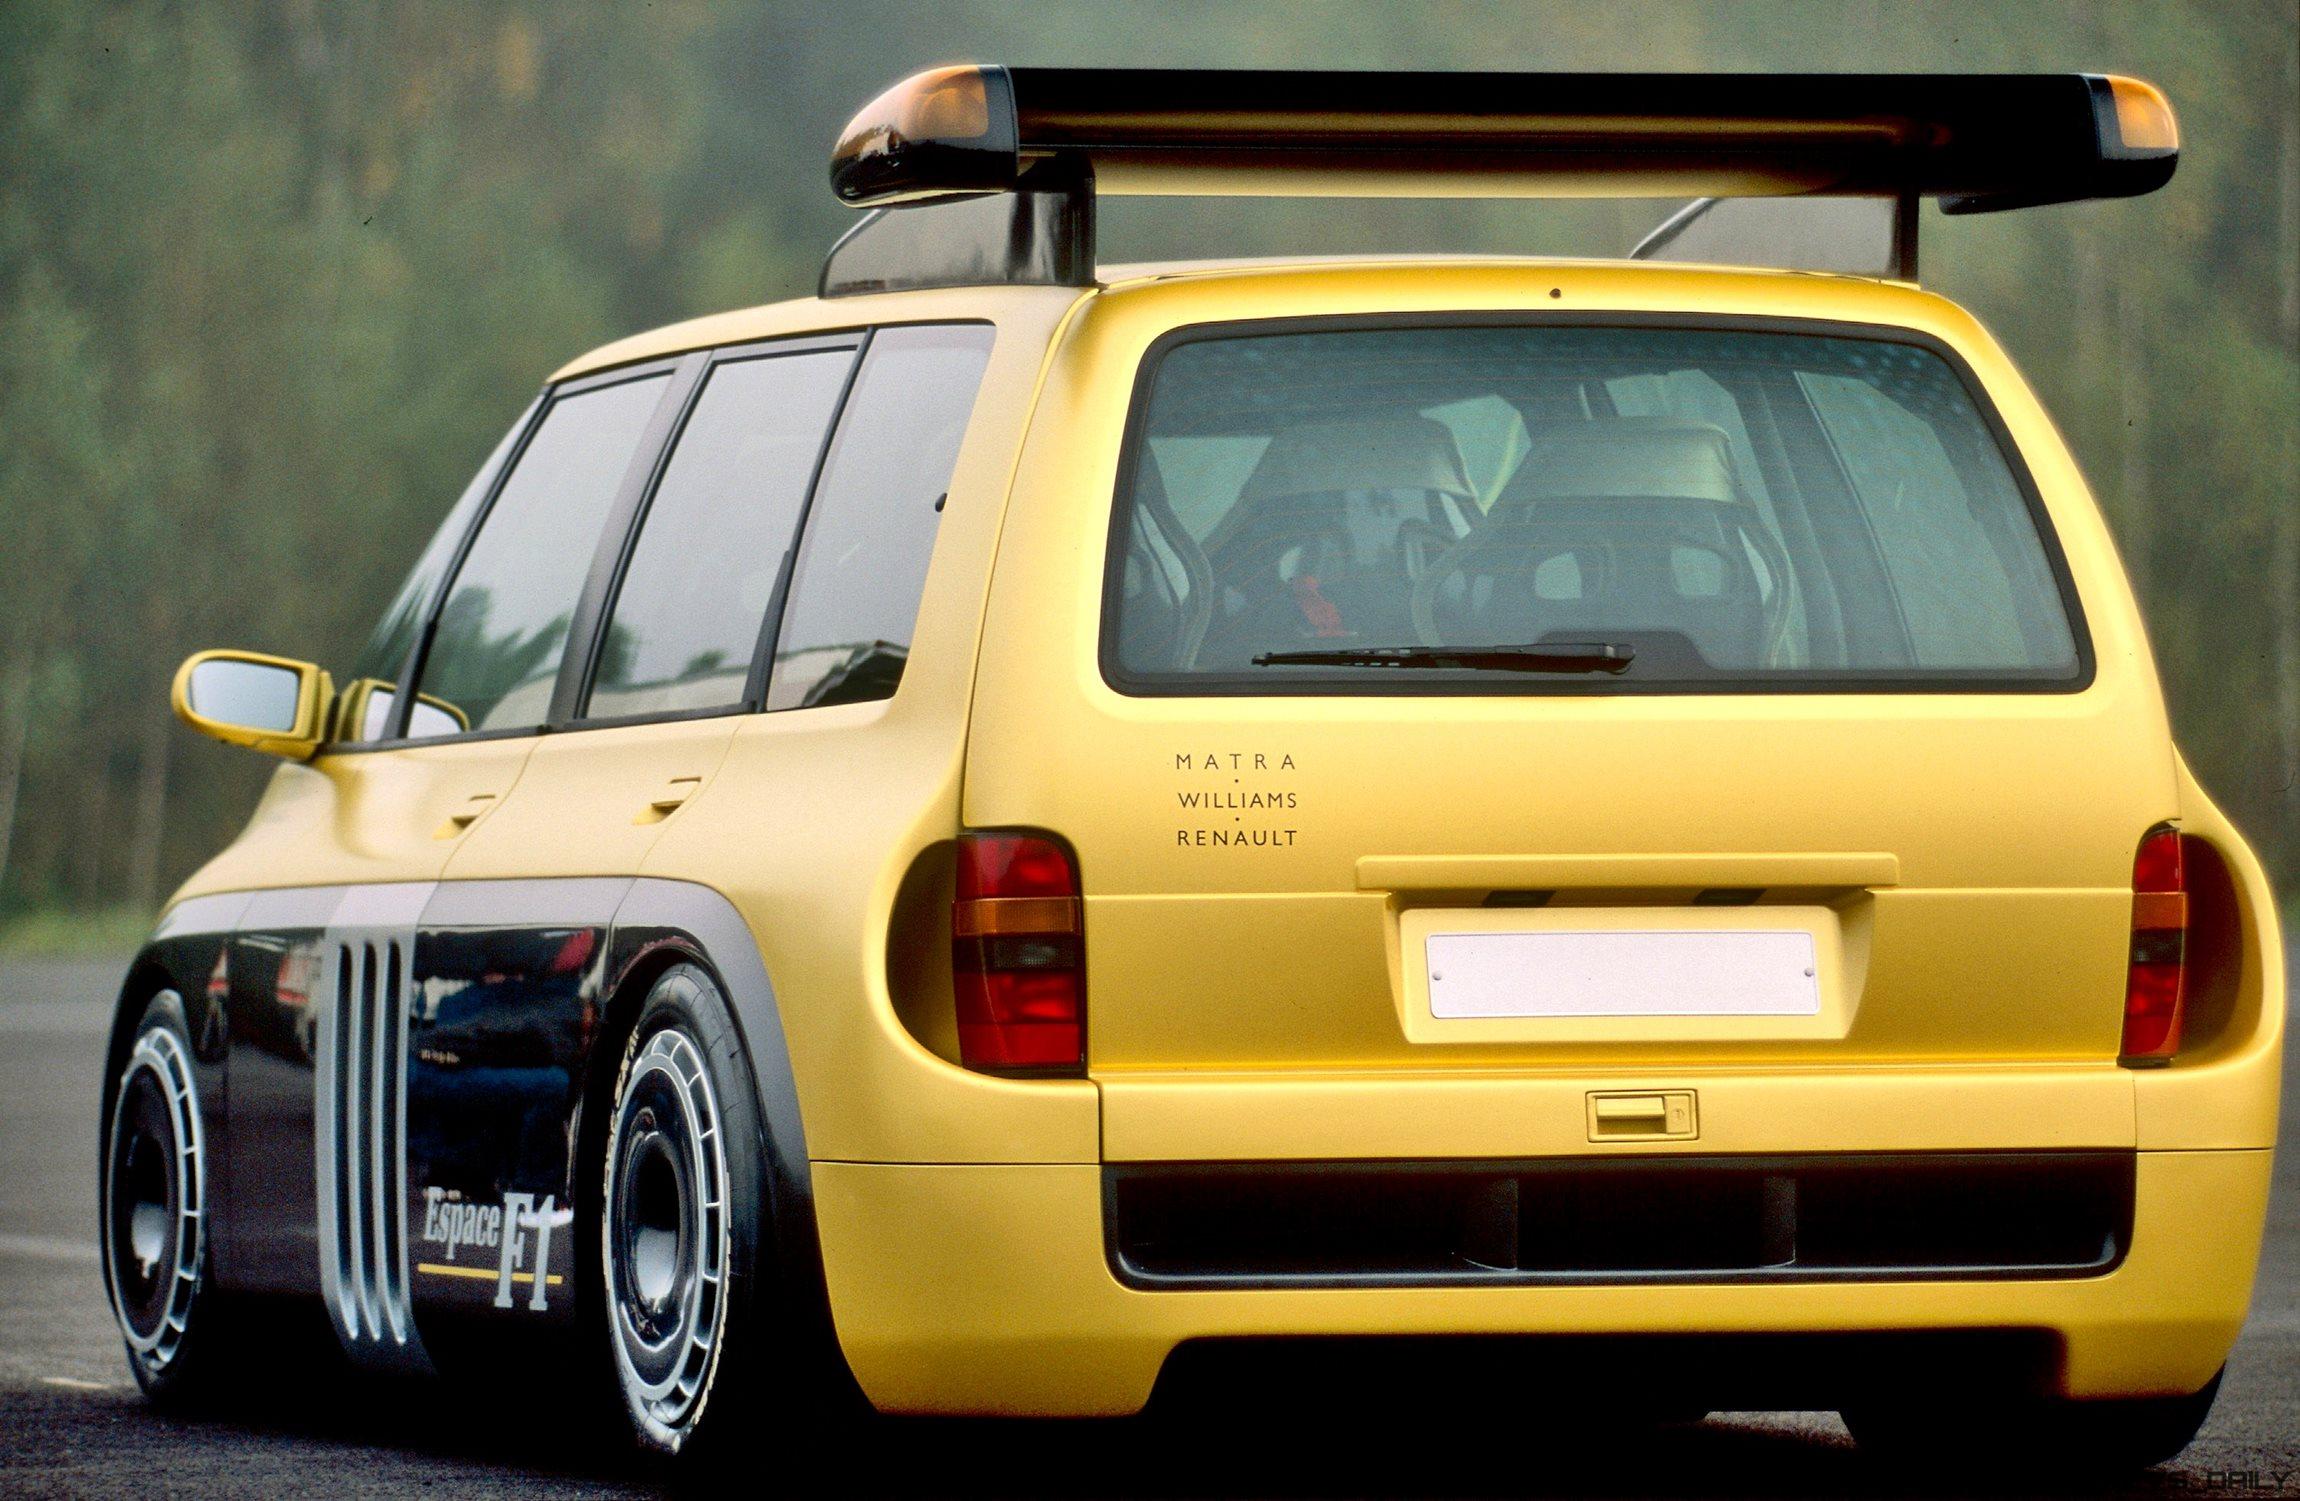 Renault Espace F1 Wallpapers